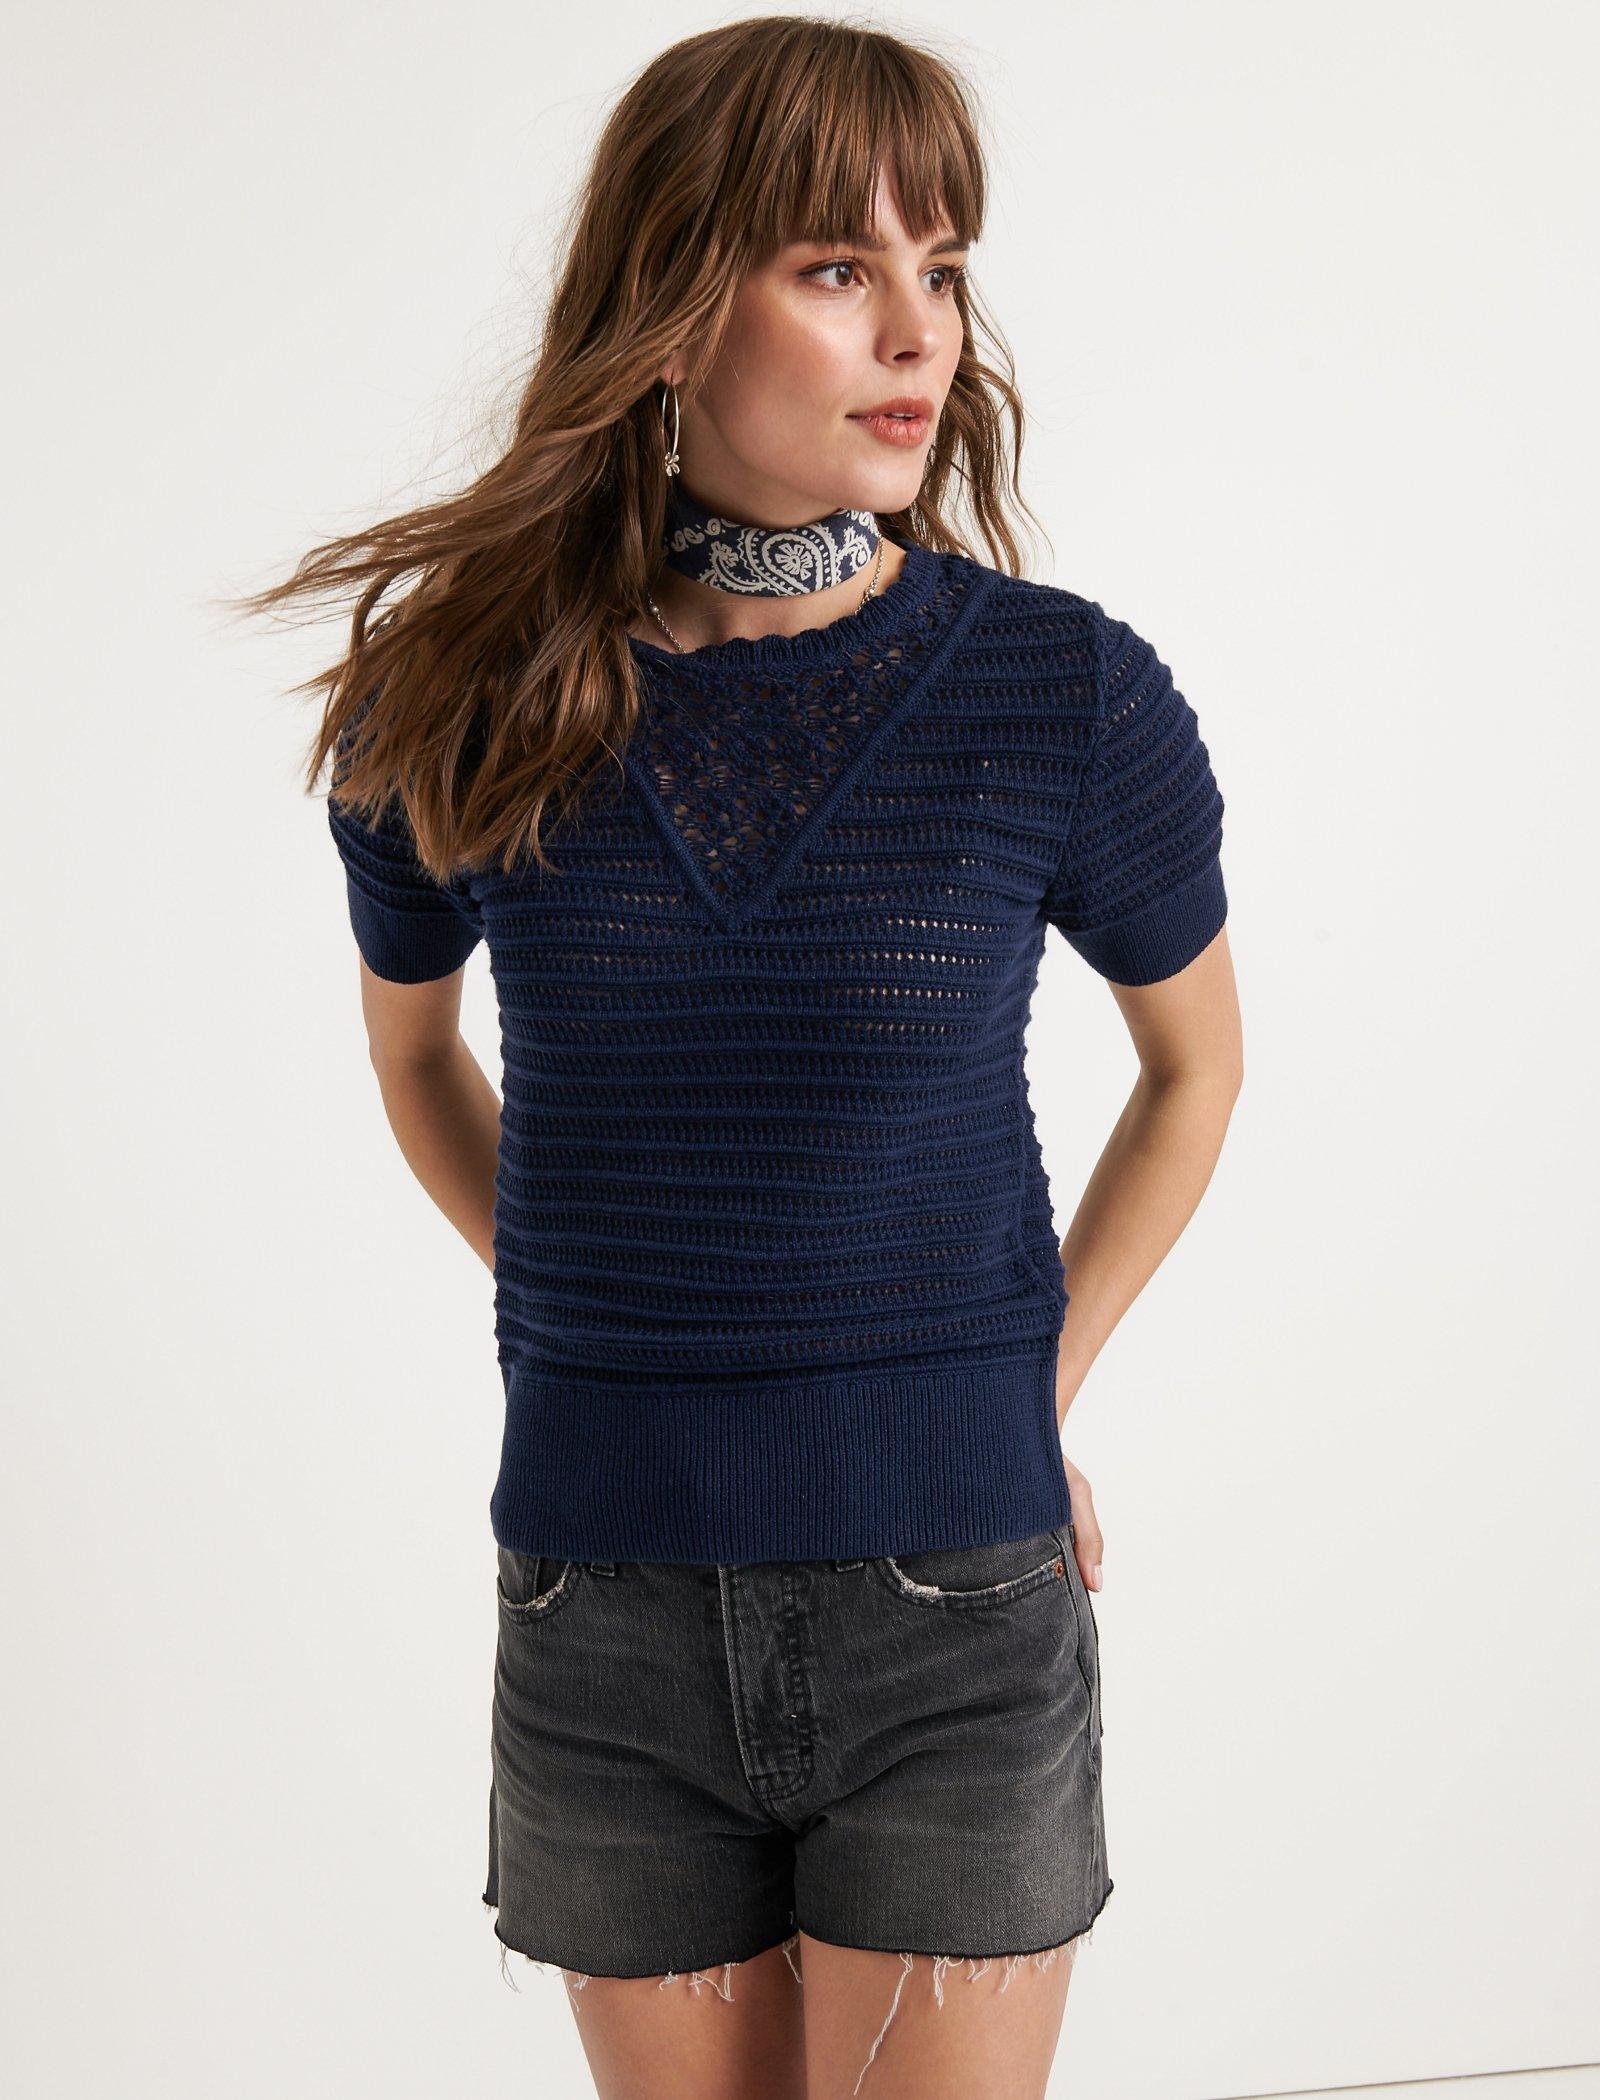 Women's Sweaters on Sale | Up to 75% Off Original Price | Lucky Brand